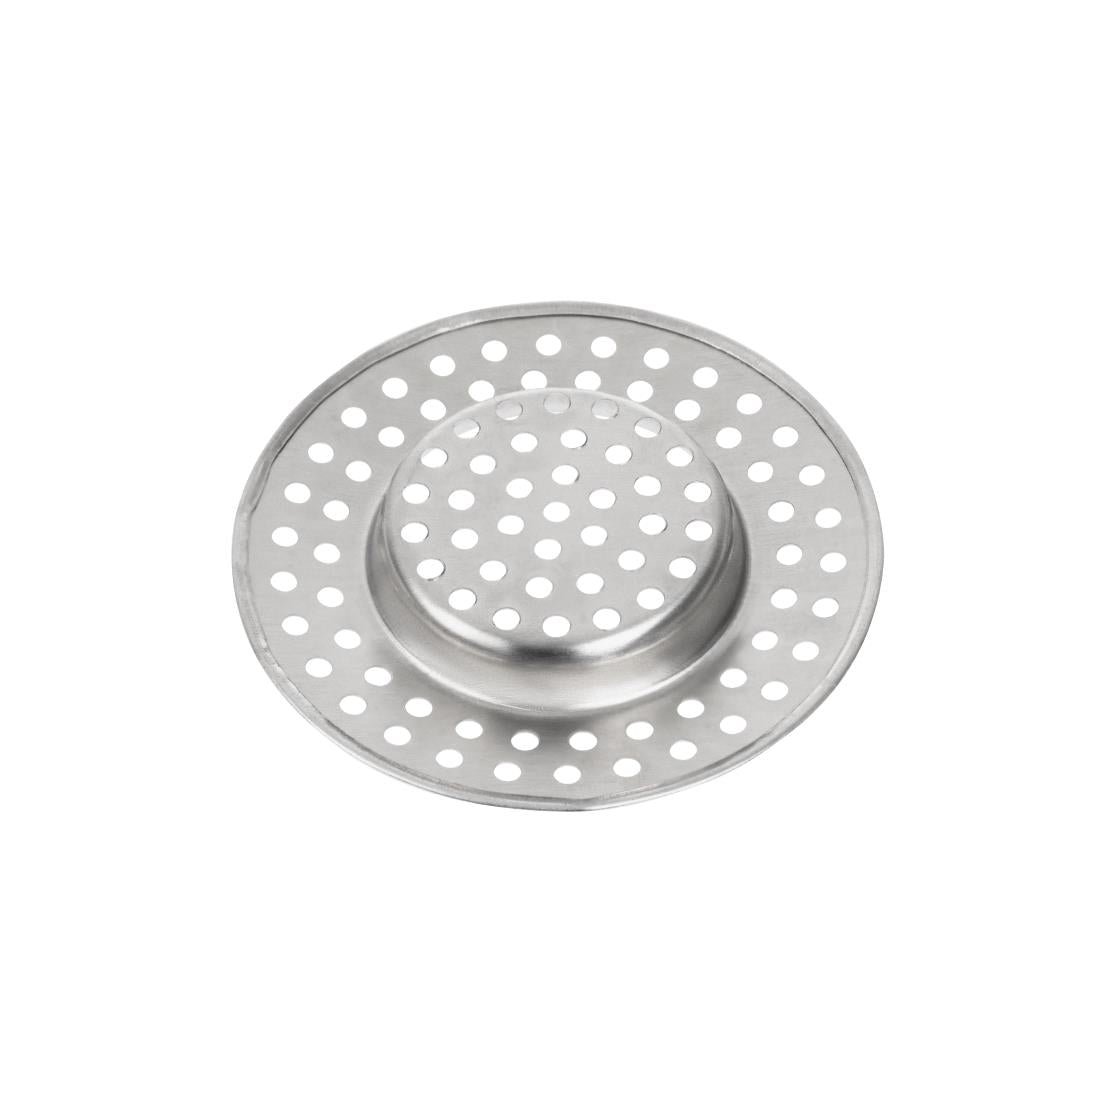 DB902 KitchenCraft Stainless Steel Large Hole Sink Strainer 75mm JD Catering Equipment Solutions Ltd